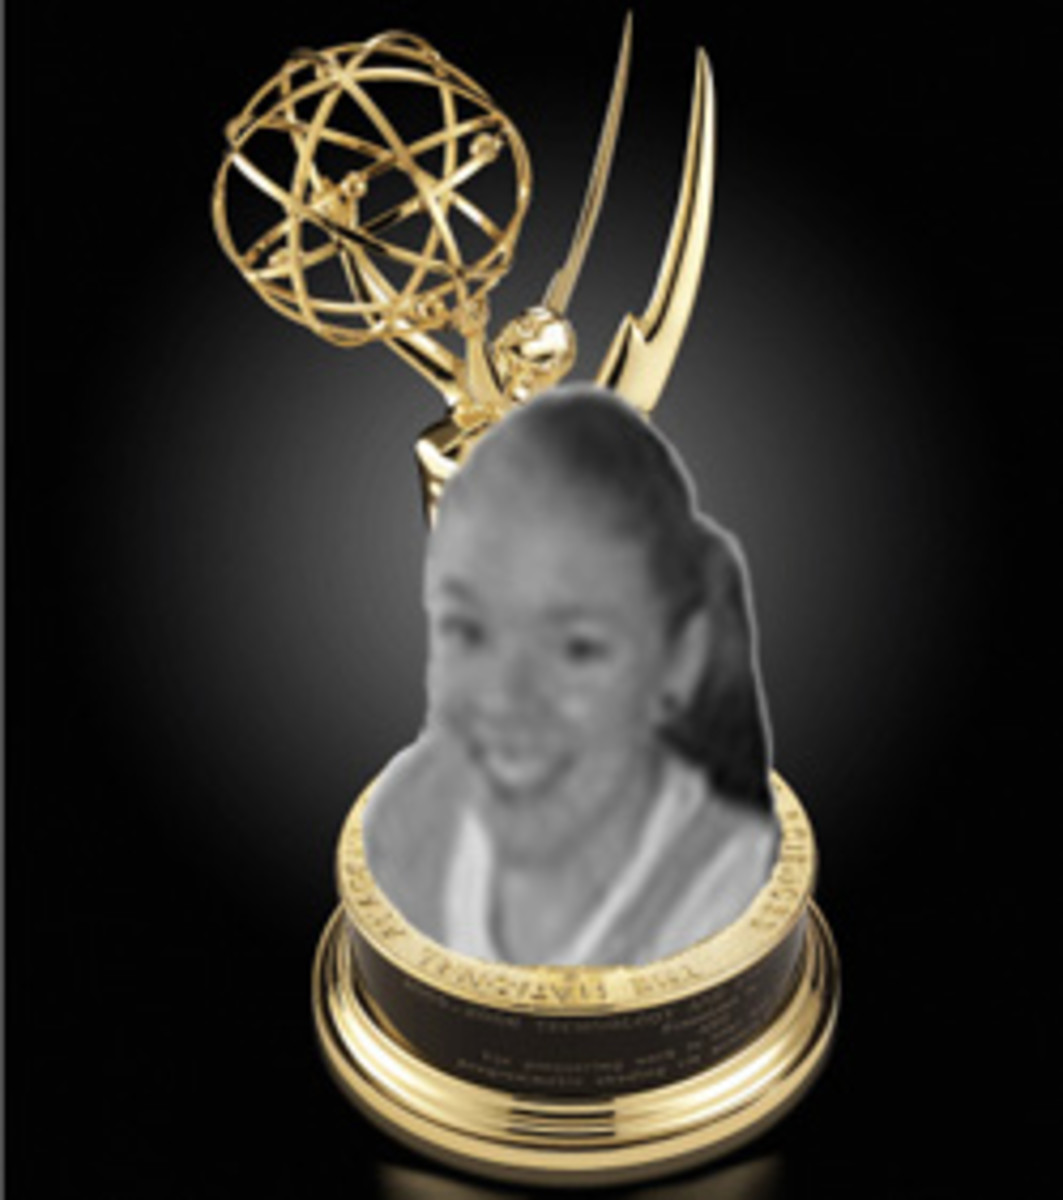 HubPages version of the Emmy - The Maddie